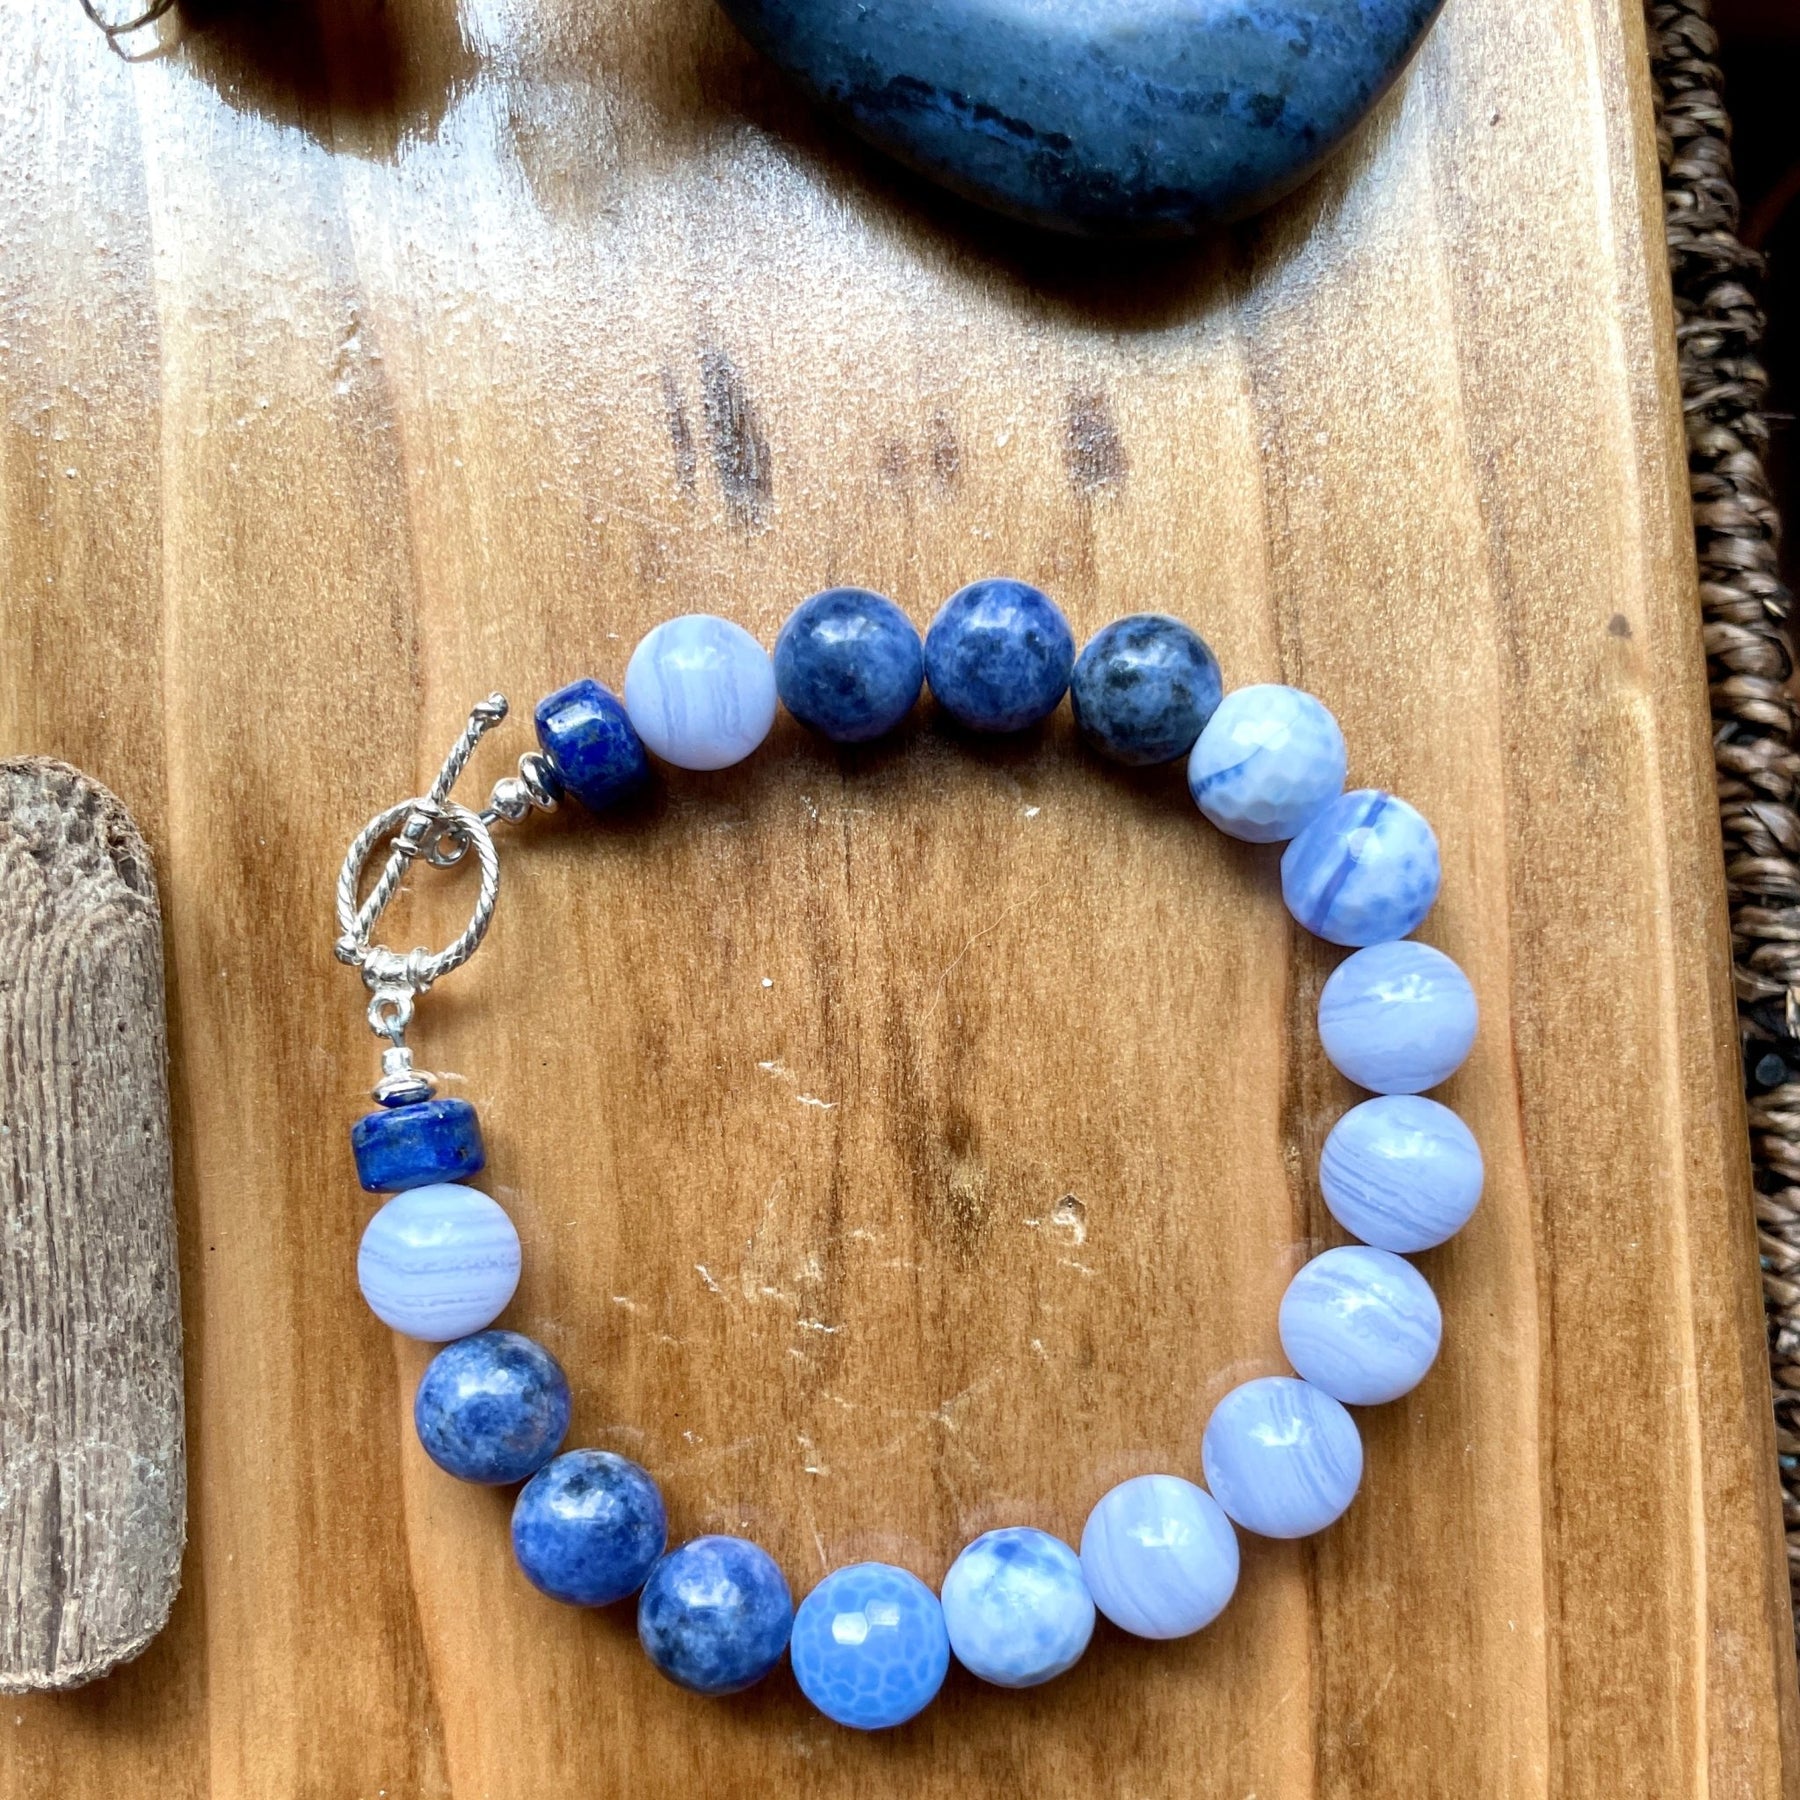 Blue Lace Agate Tumbled Stone Bracelet – The Healing Pear